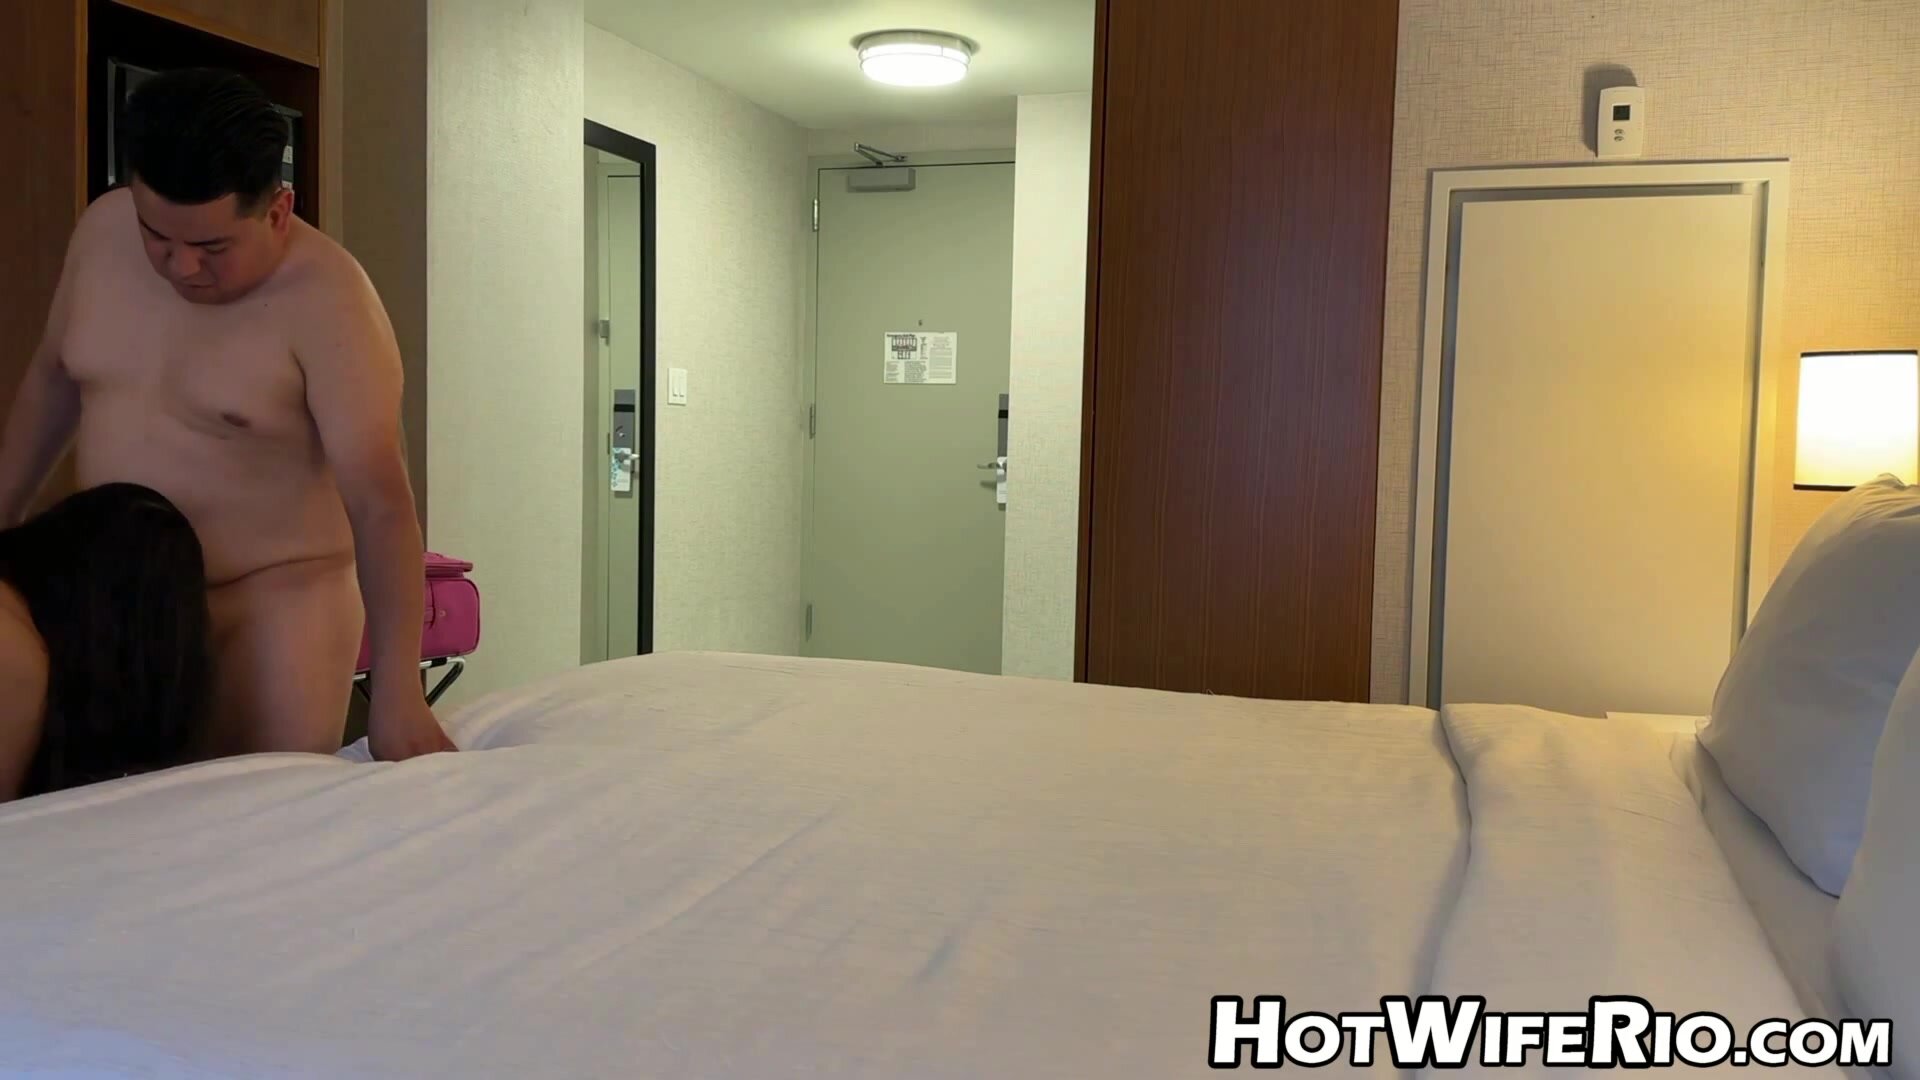 Hot Wife Rio - Cheating Wife In Hotel #124